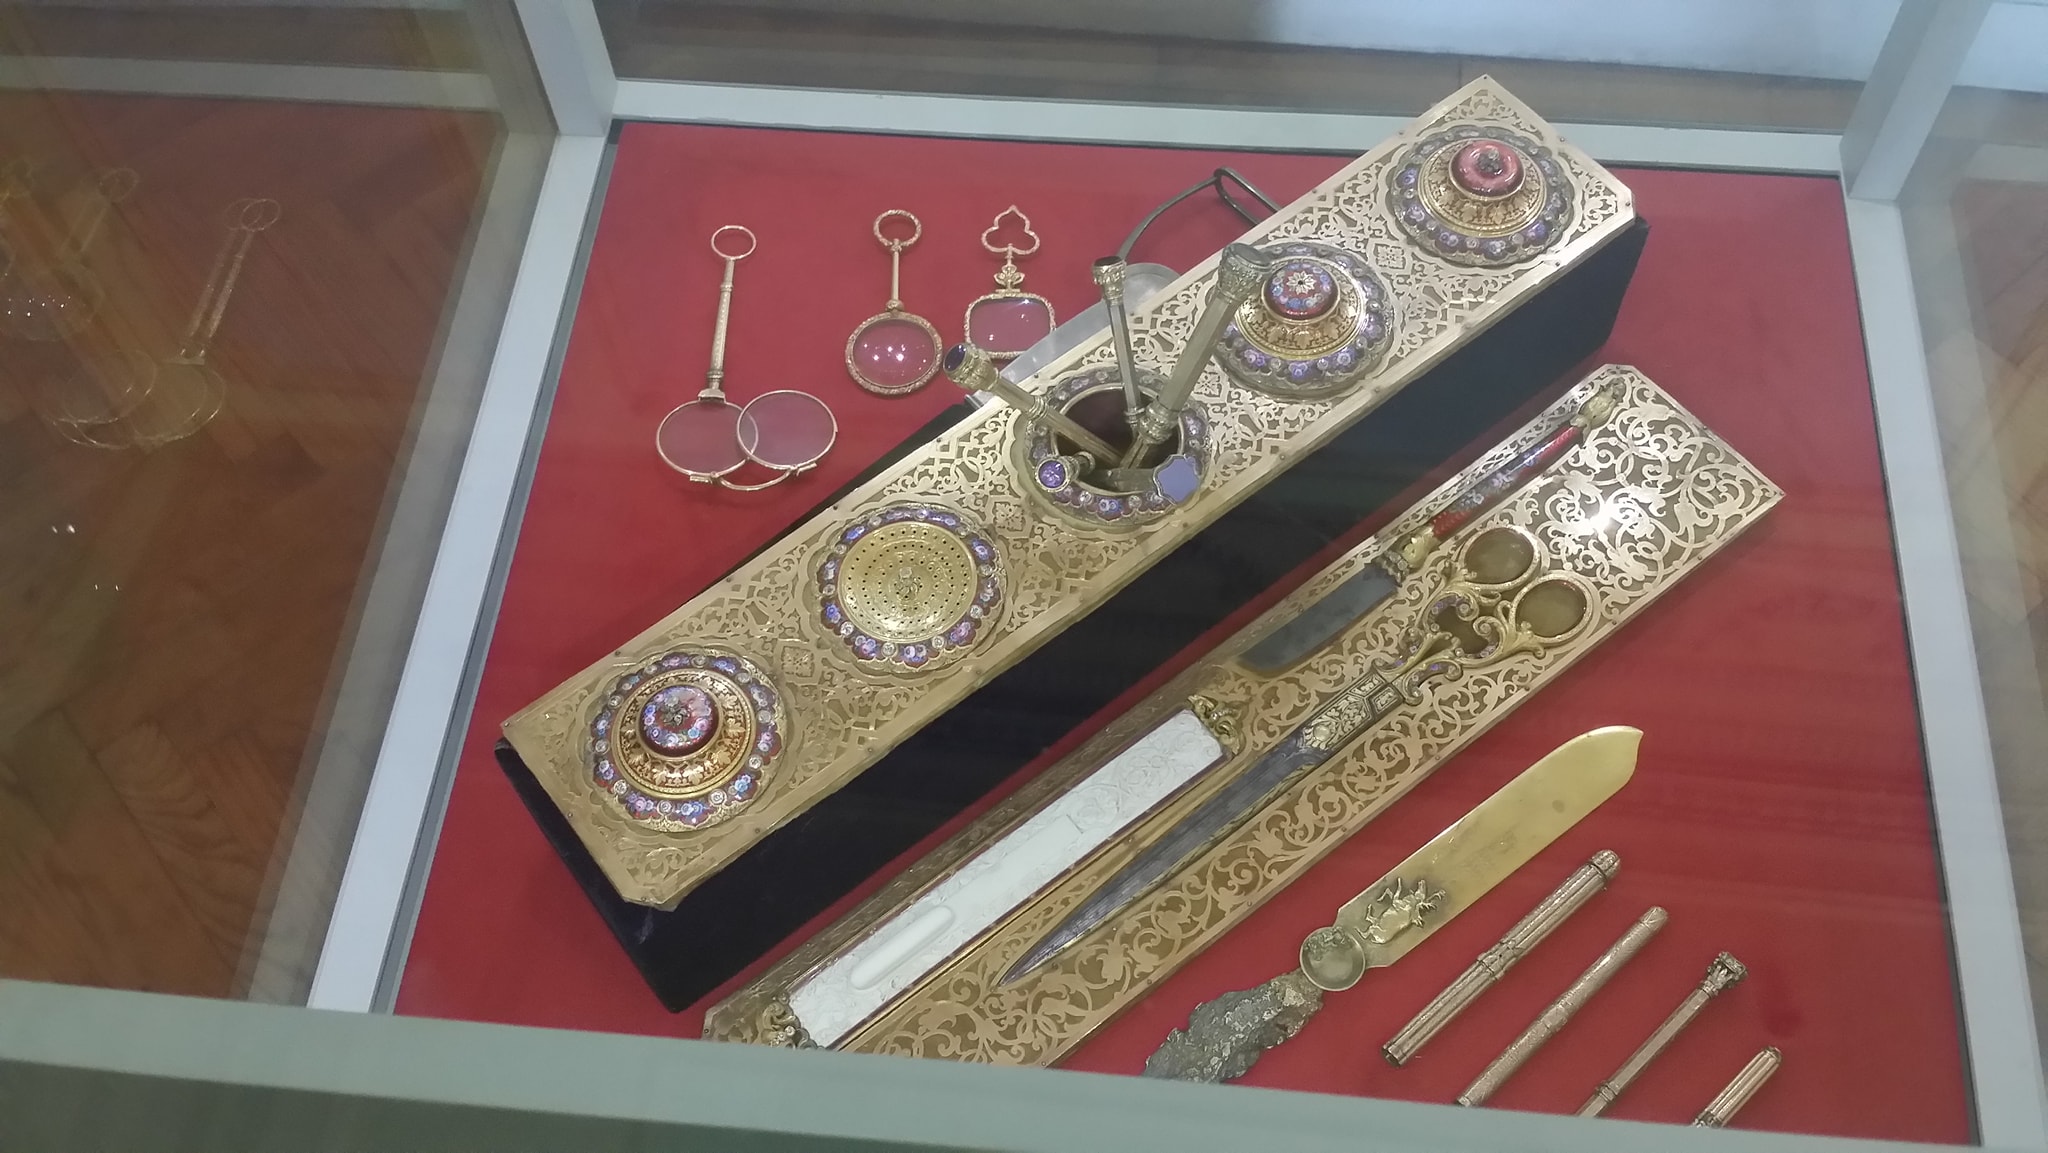 Royal Jewelery Museum Collection (14)